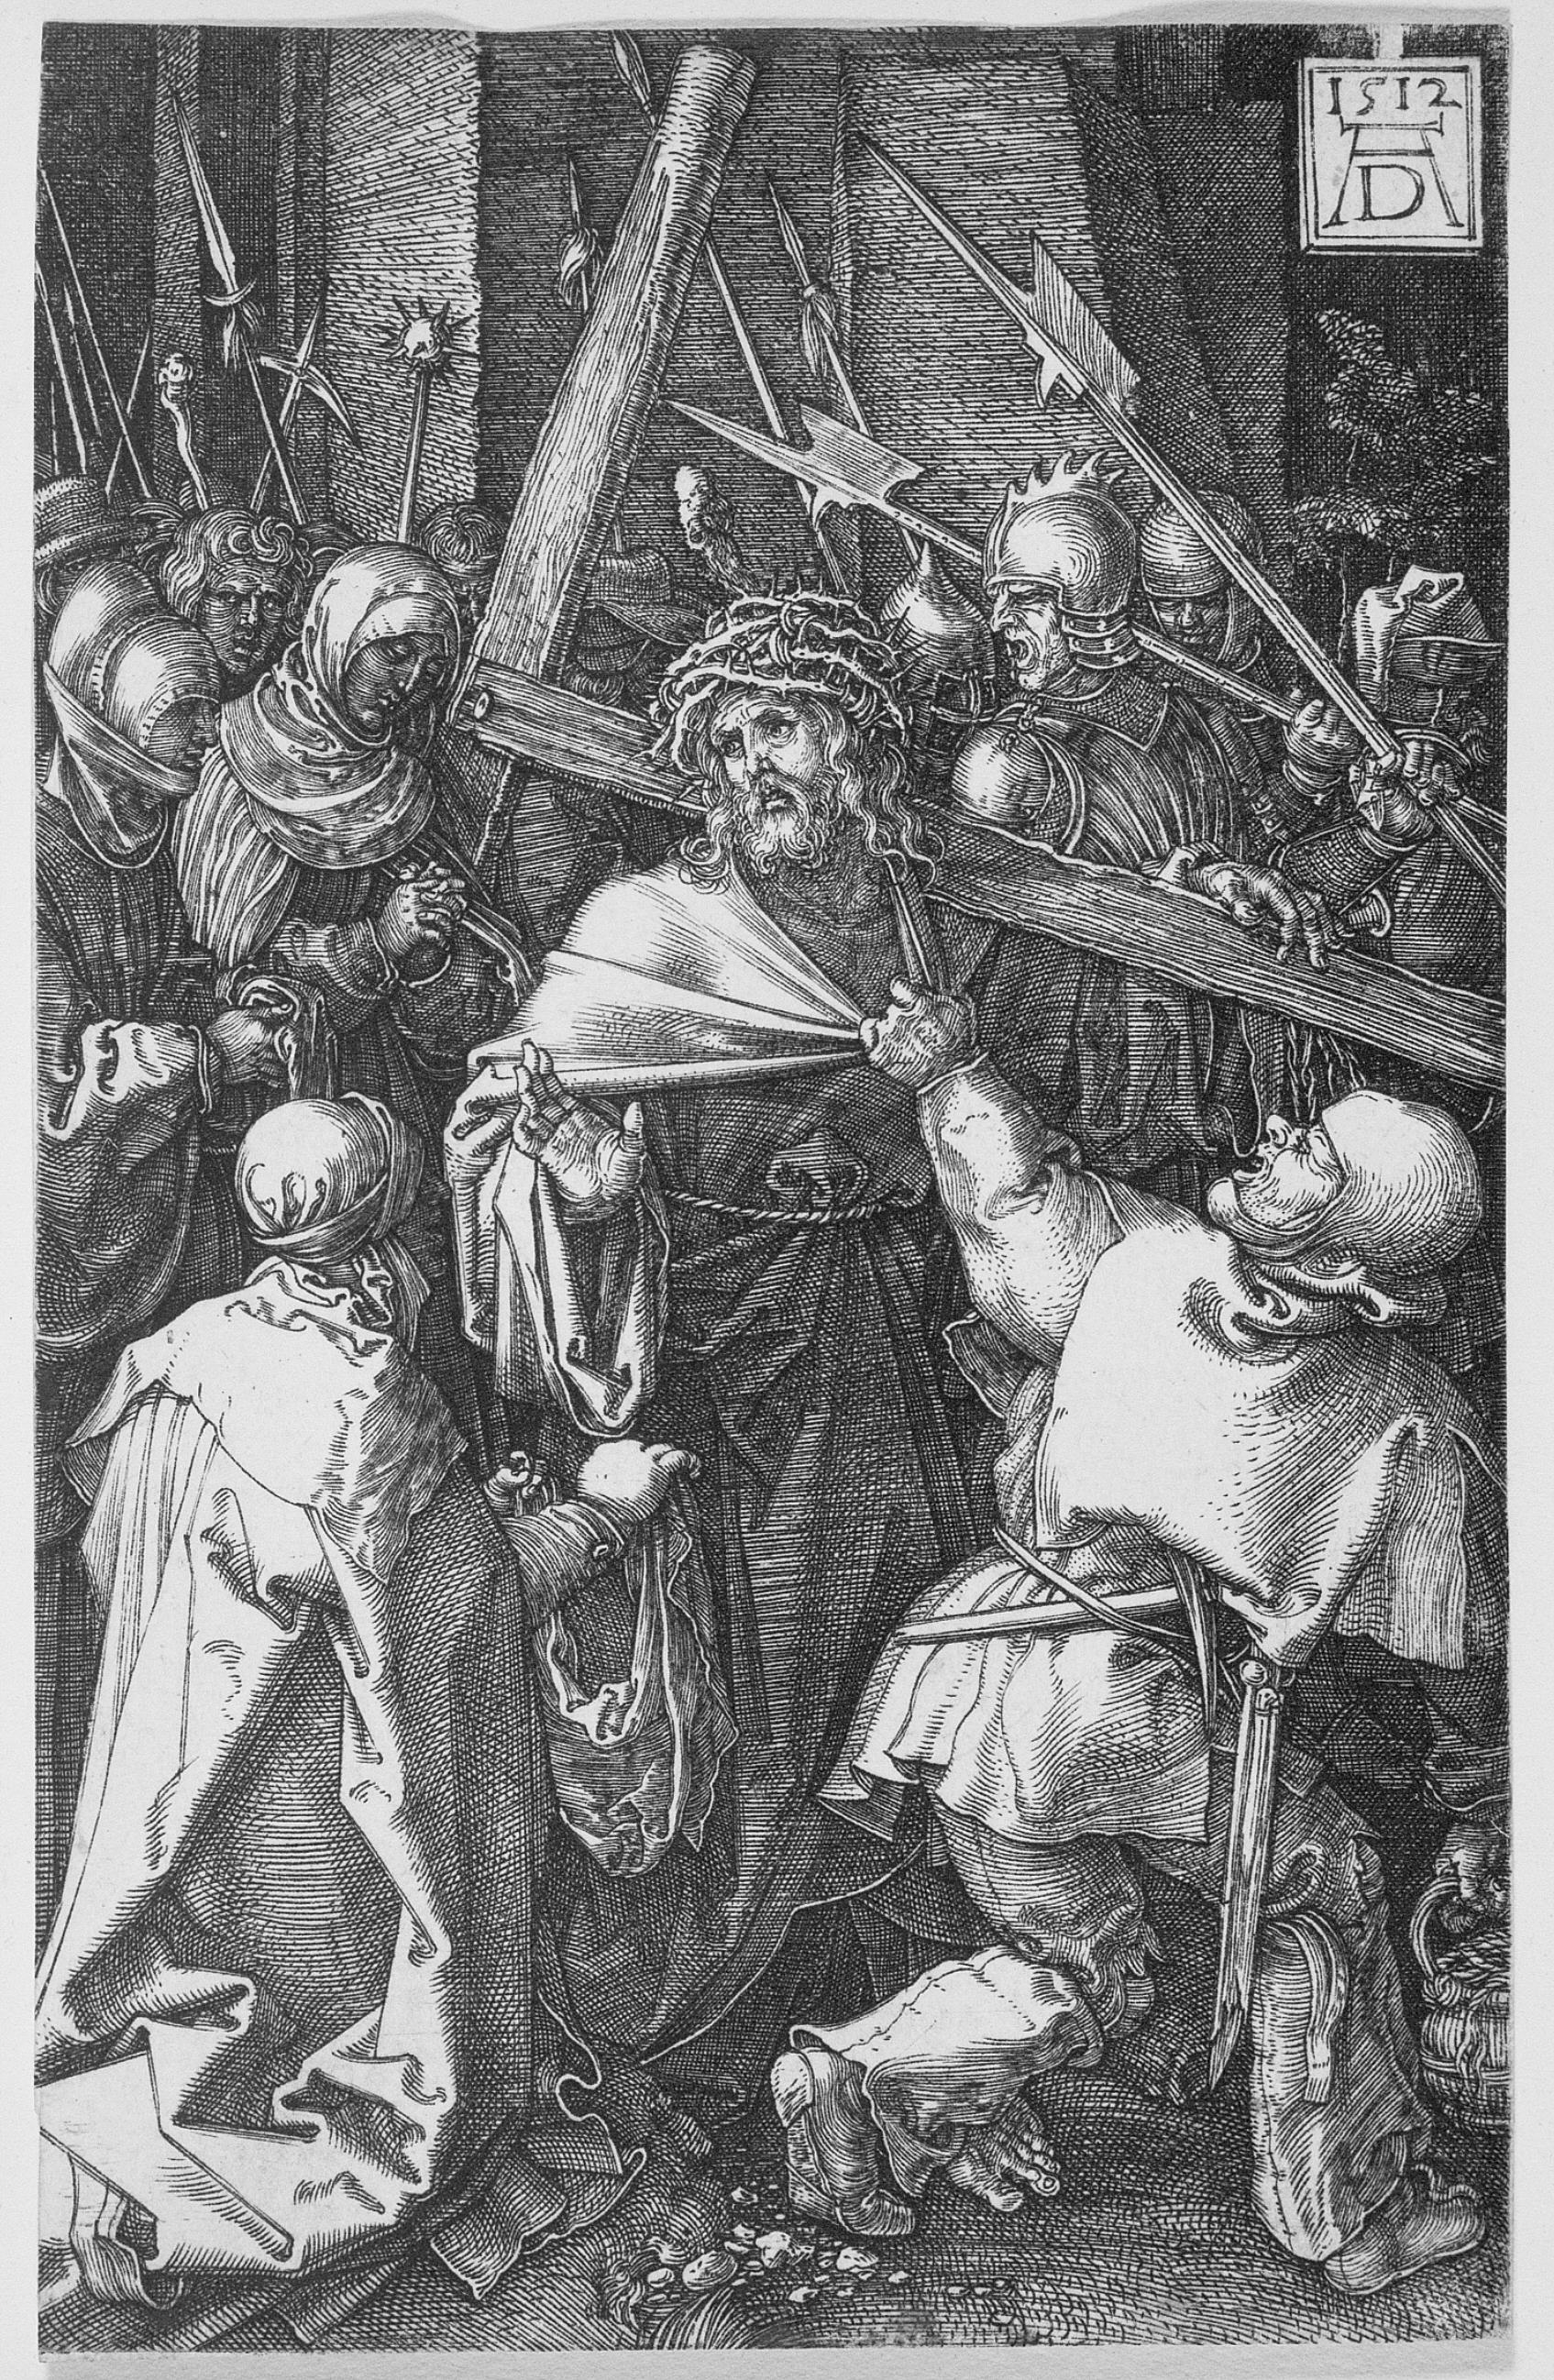 Cutting a Fine Line: Durer's Engraved Passion